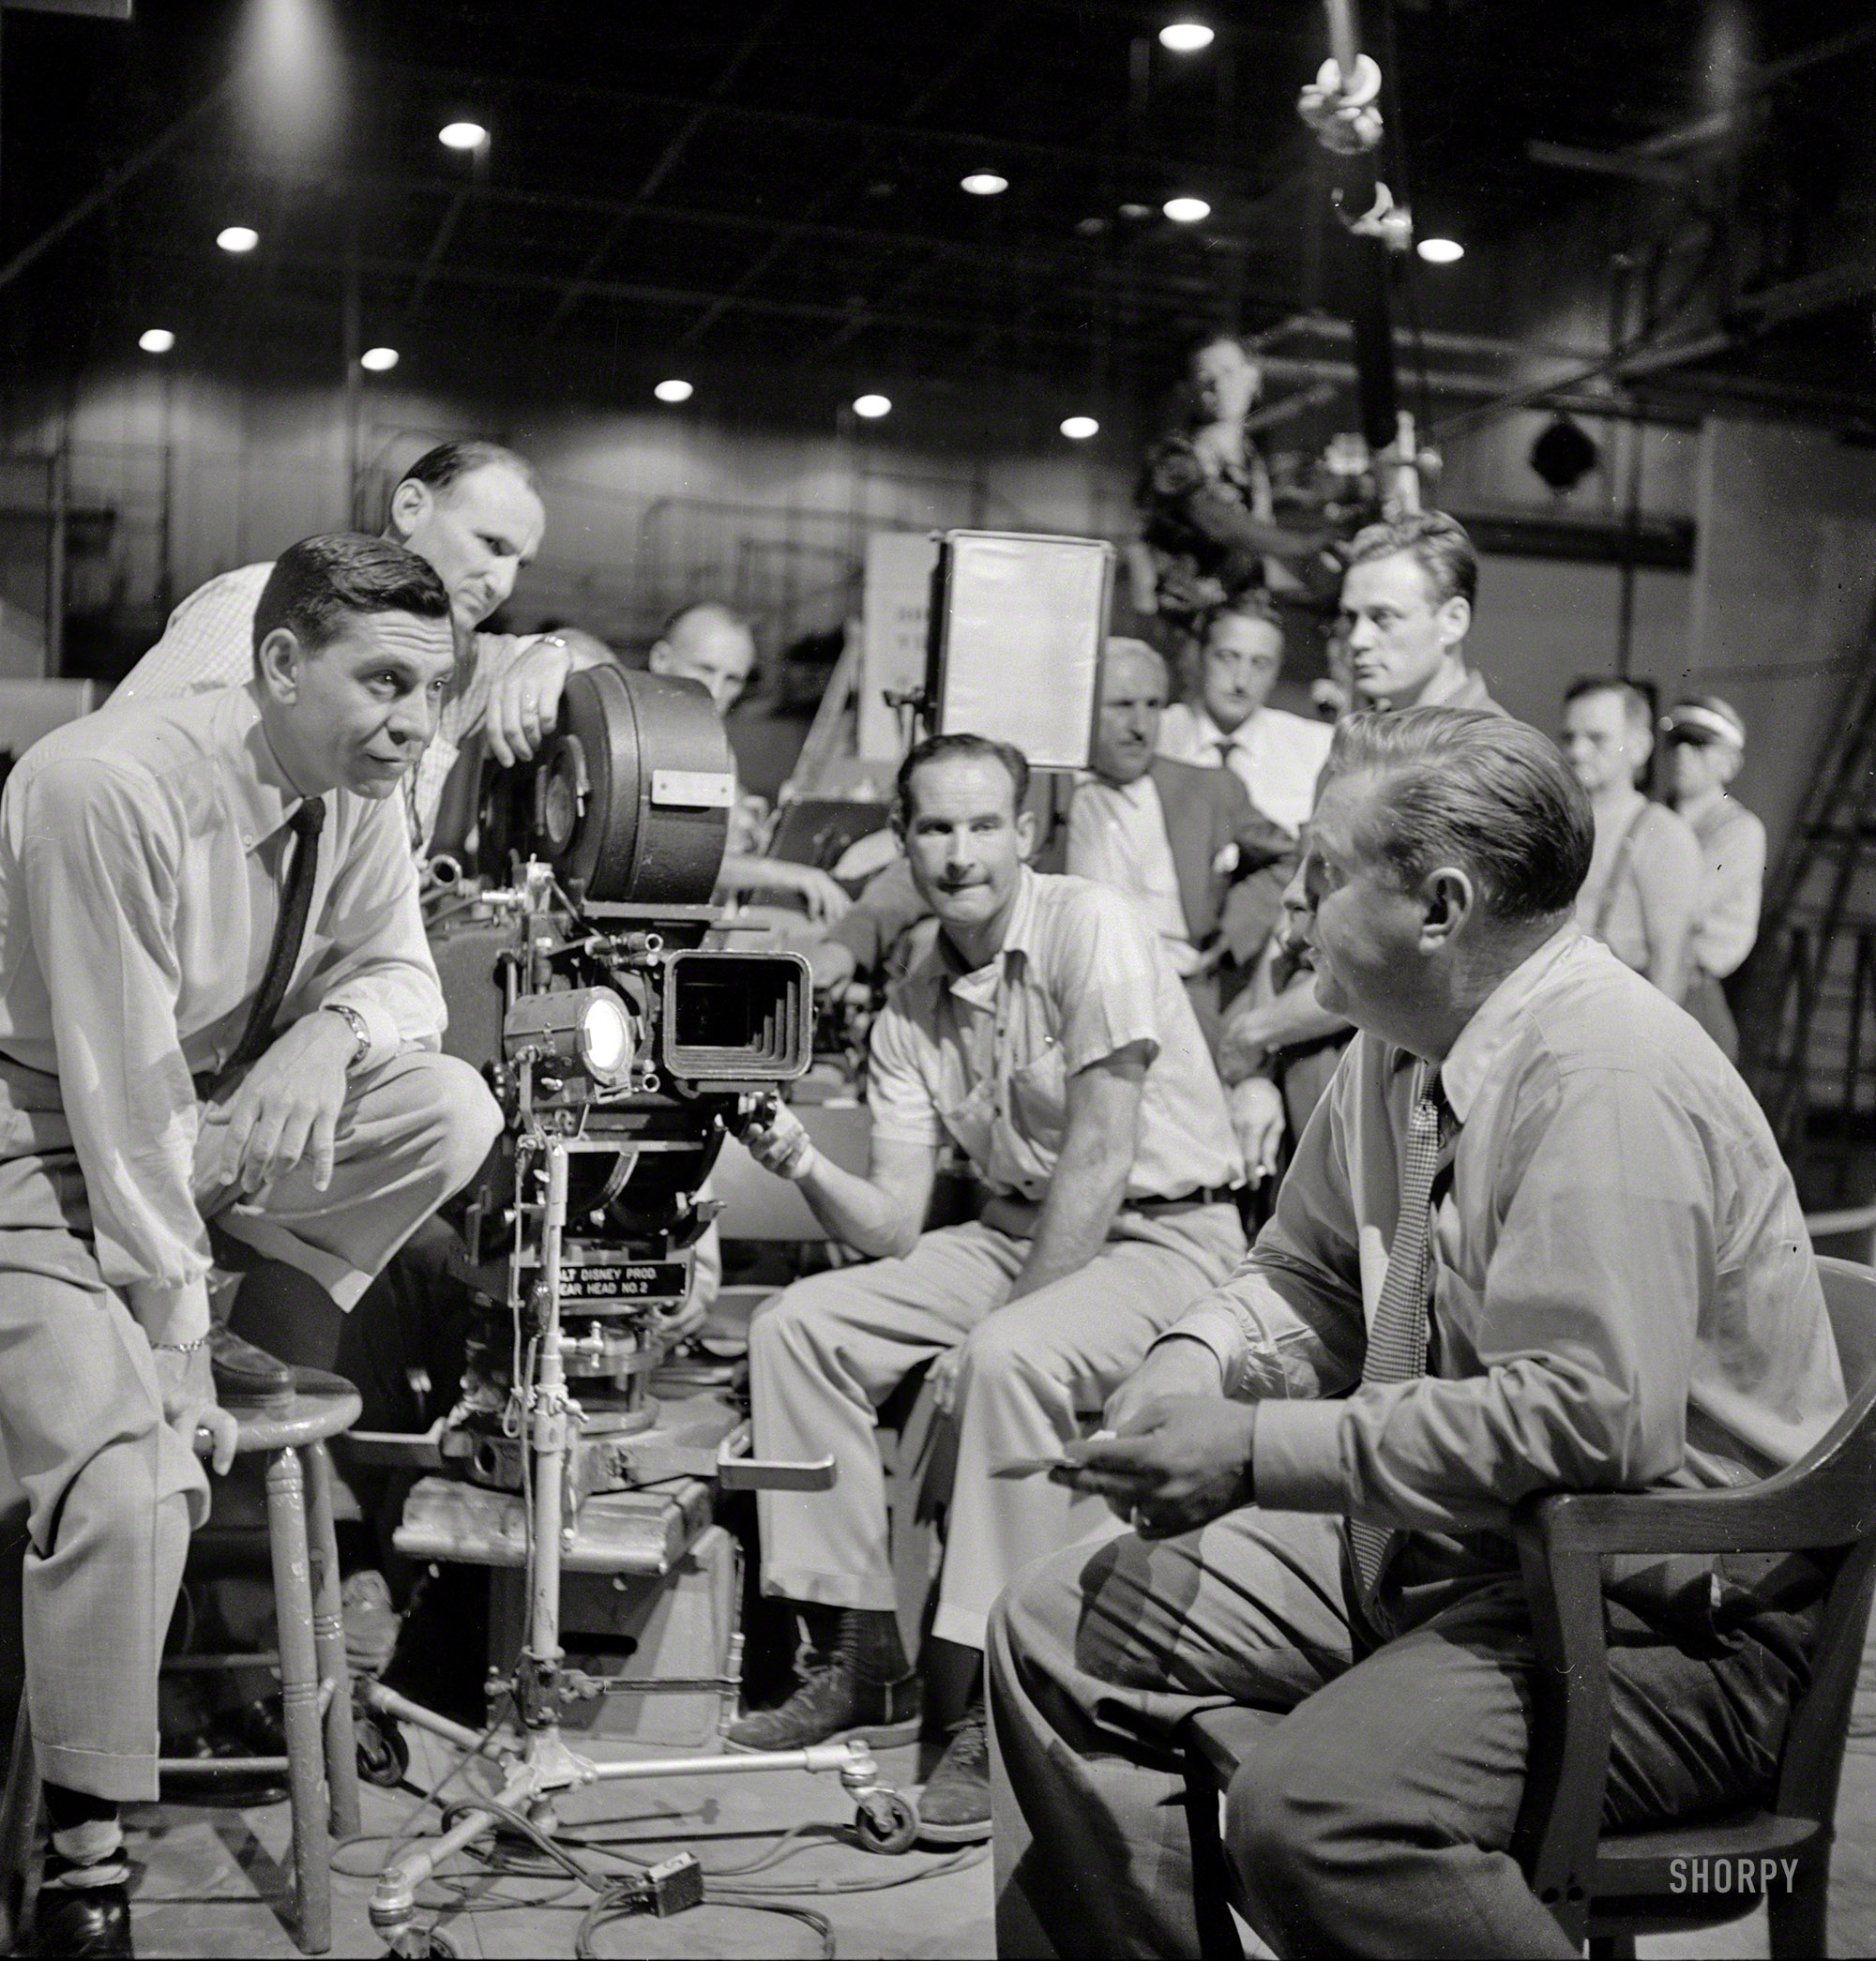 Los Angeles, 1952. Just the facts: "Actor/director Jack Webb on the set of the television show Dragnet." Photo by John Vachon for the Look magazine article "For Dragnet's Jack Webb, Crime Pays Off." View full size.